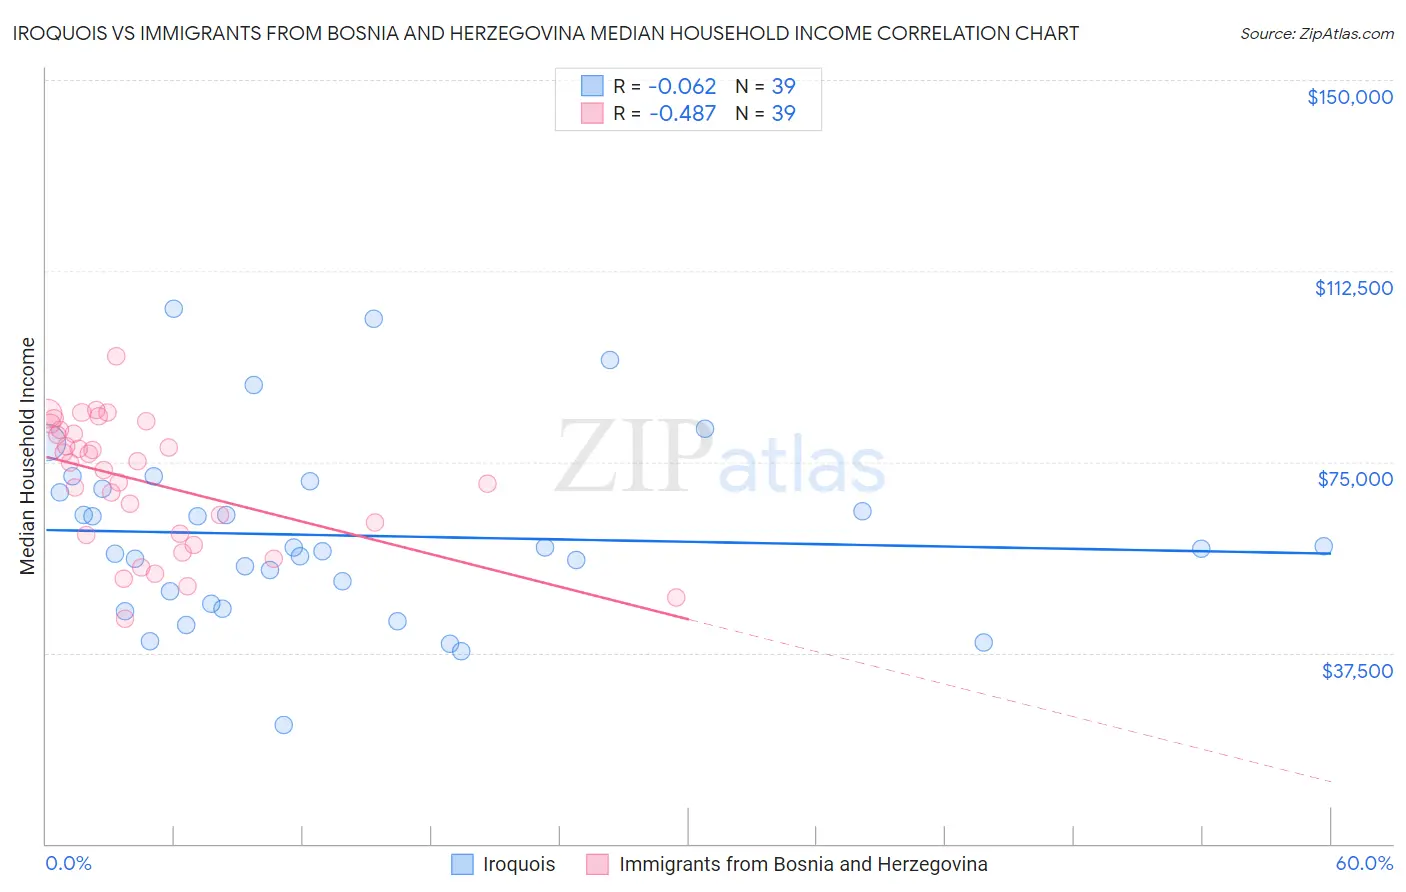 Iroquois vs Immigrants from Bosnia and Herzegovina Median Household Income